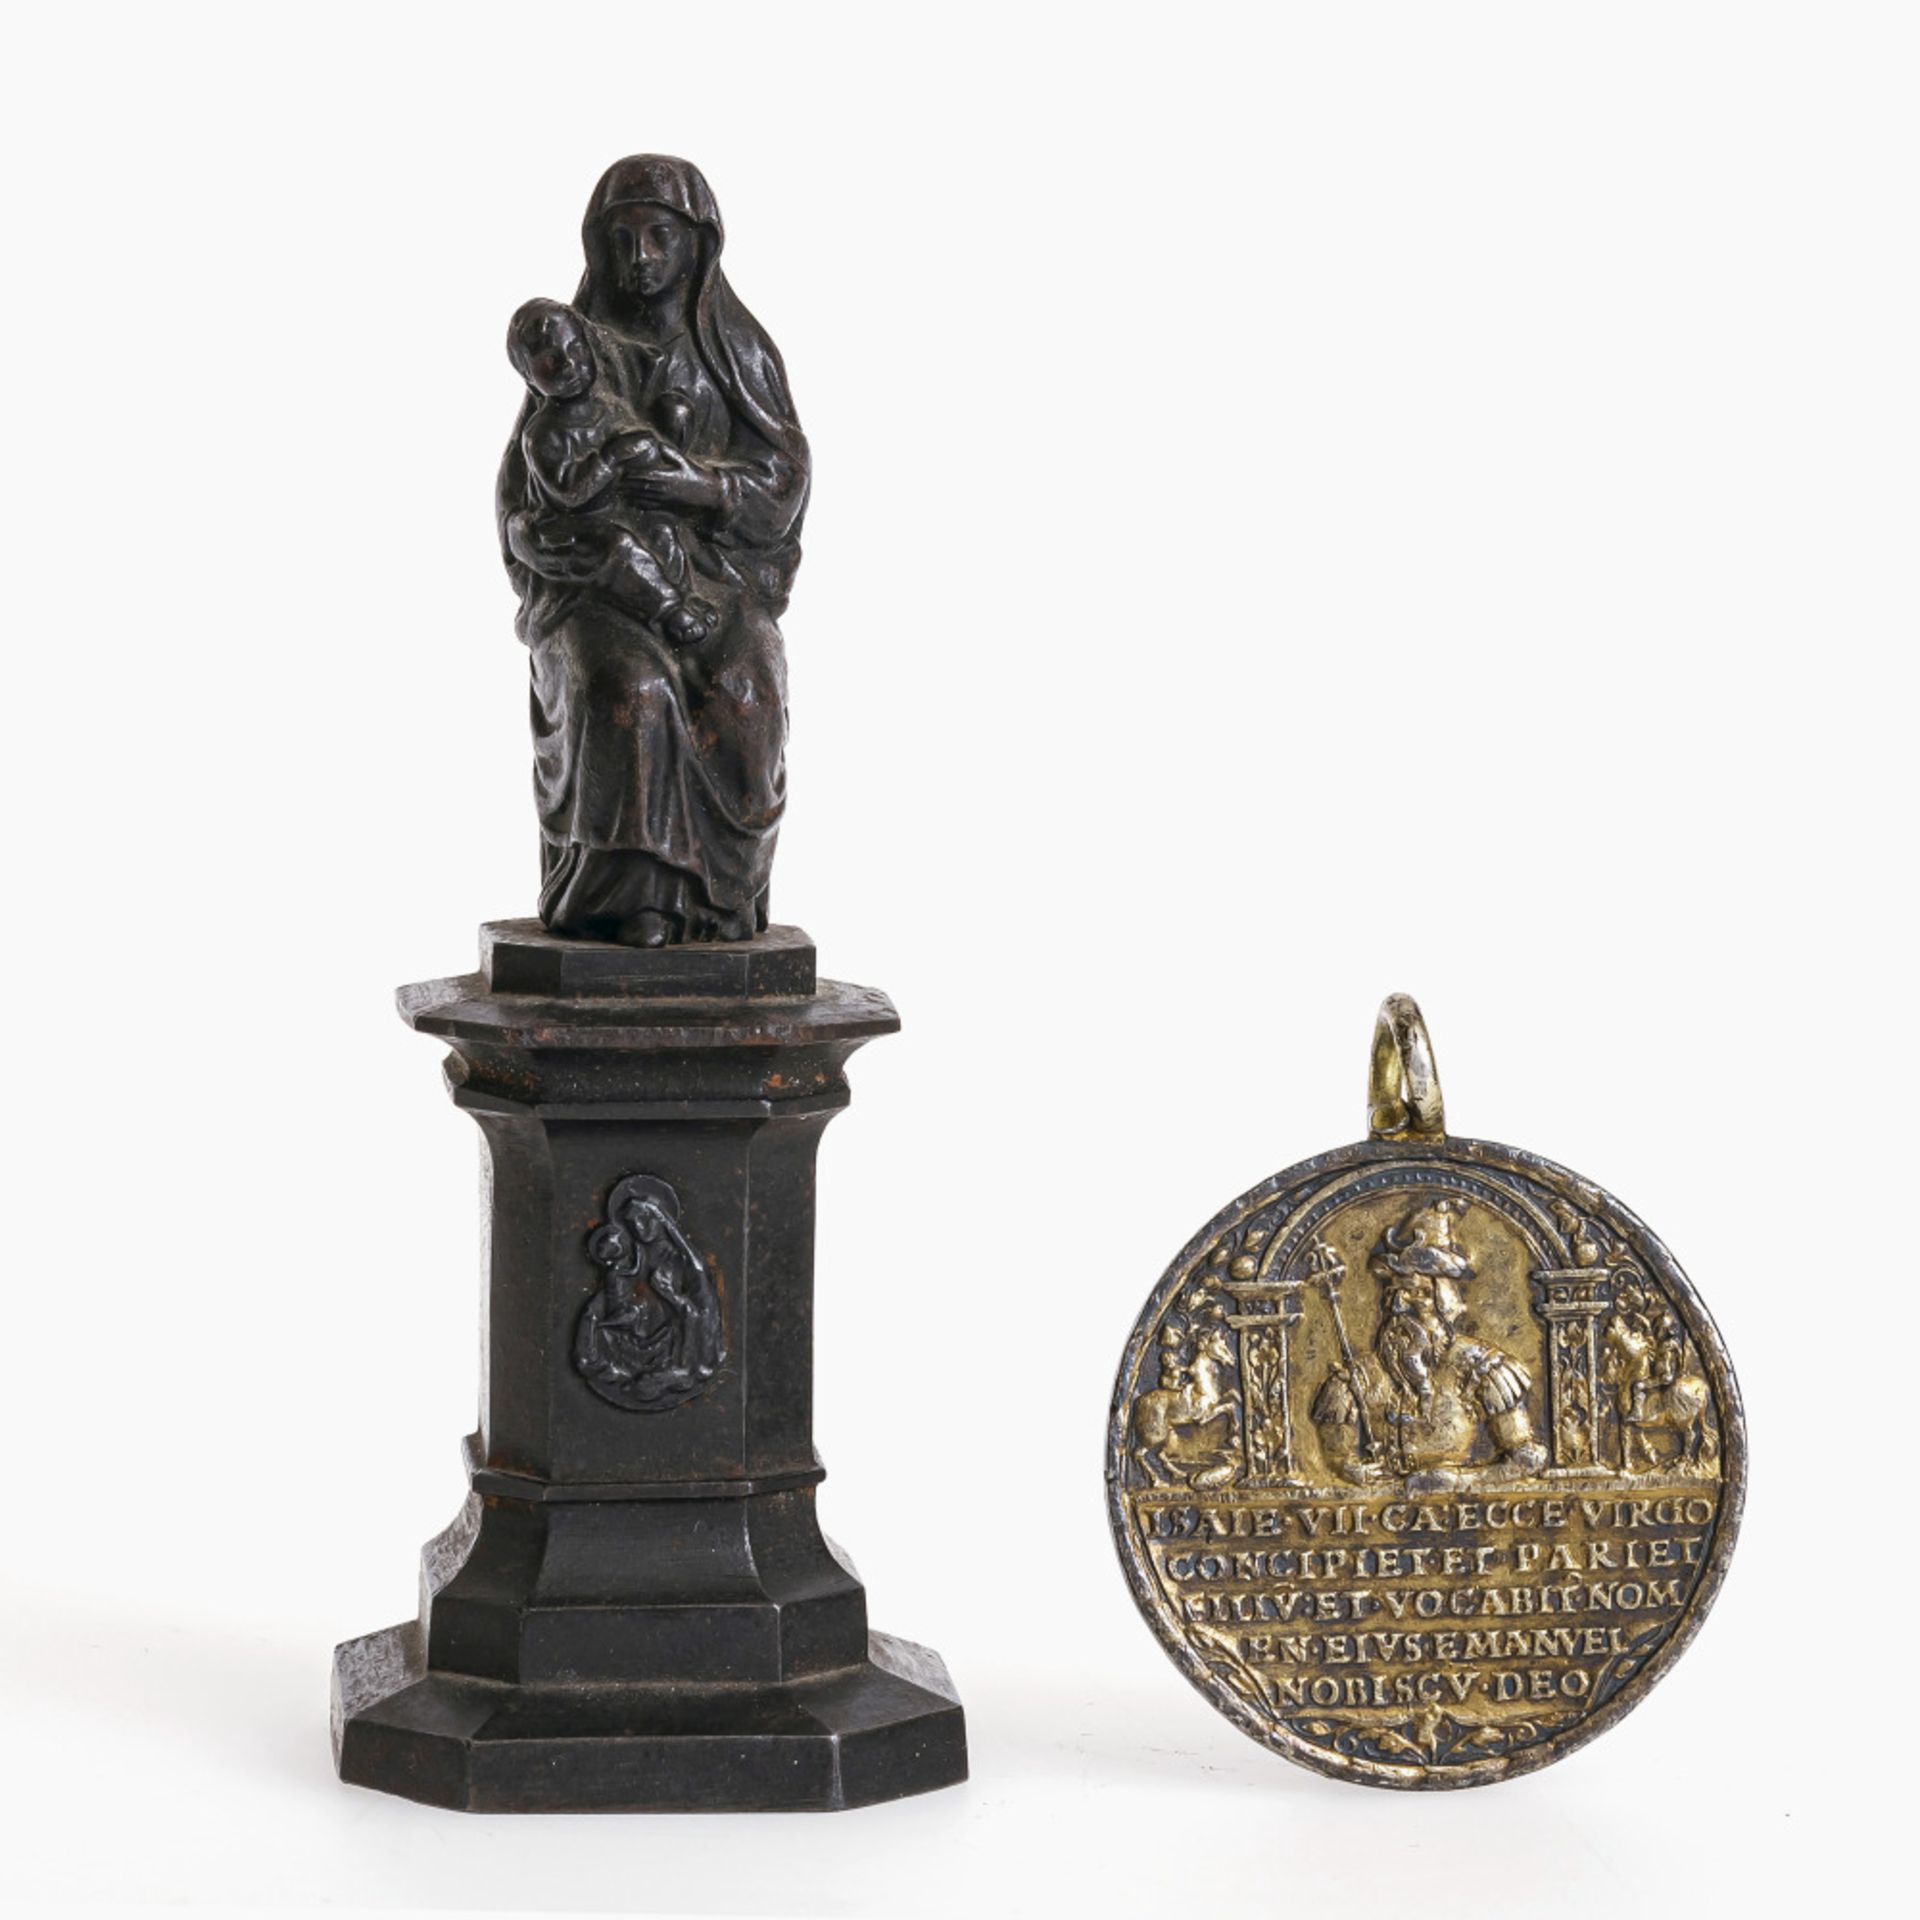 A medal "Prophet Isaiah" / "Adoration of the Shepherds" - 16th century